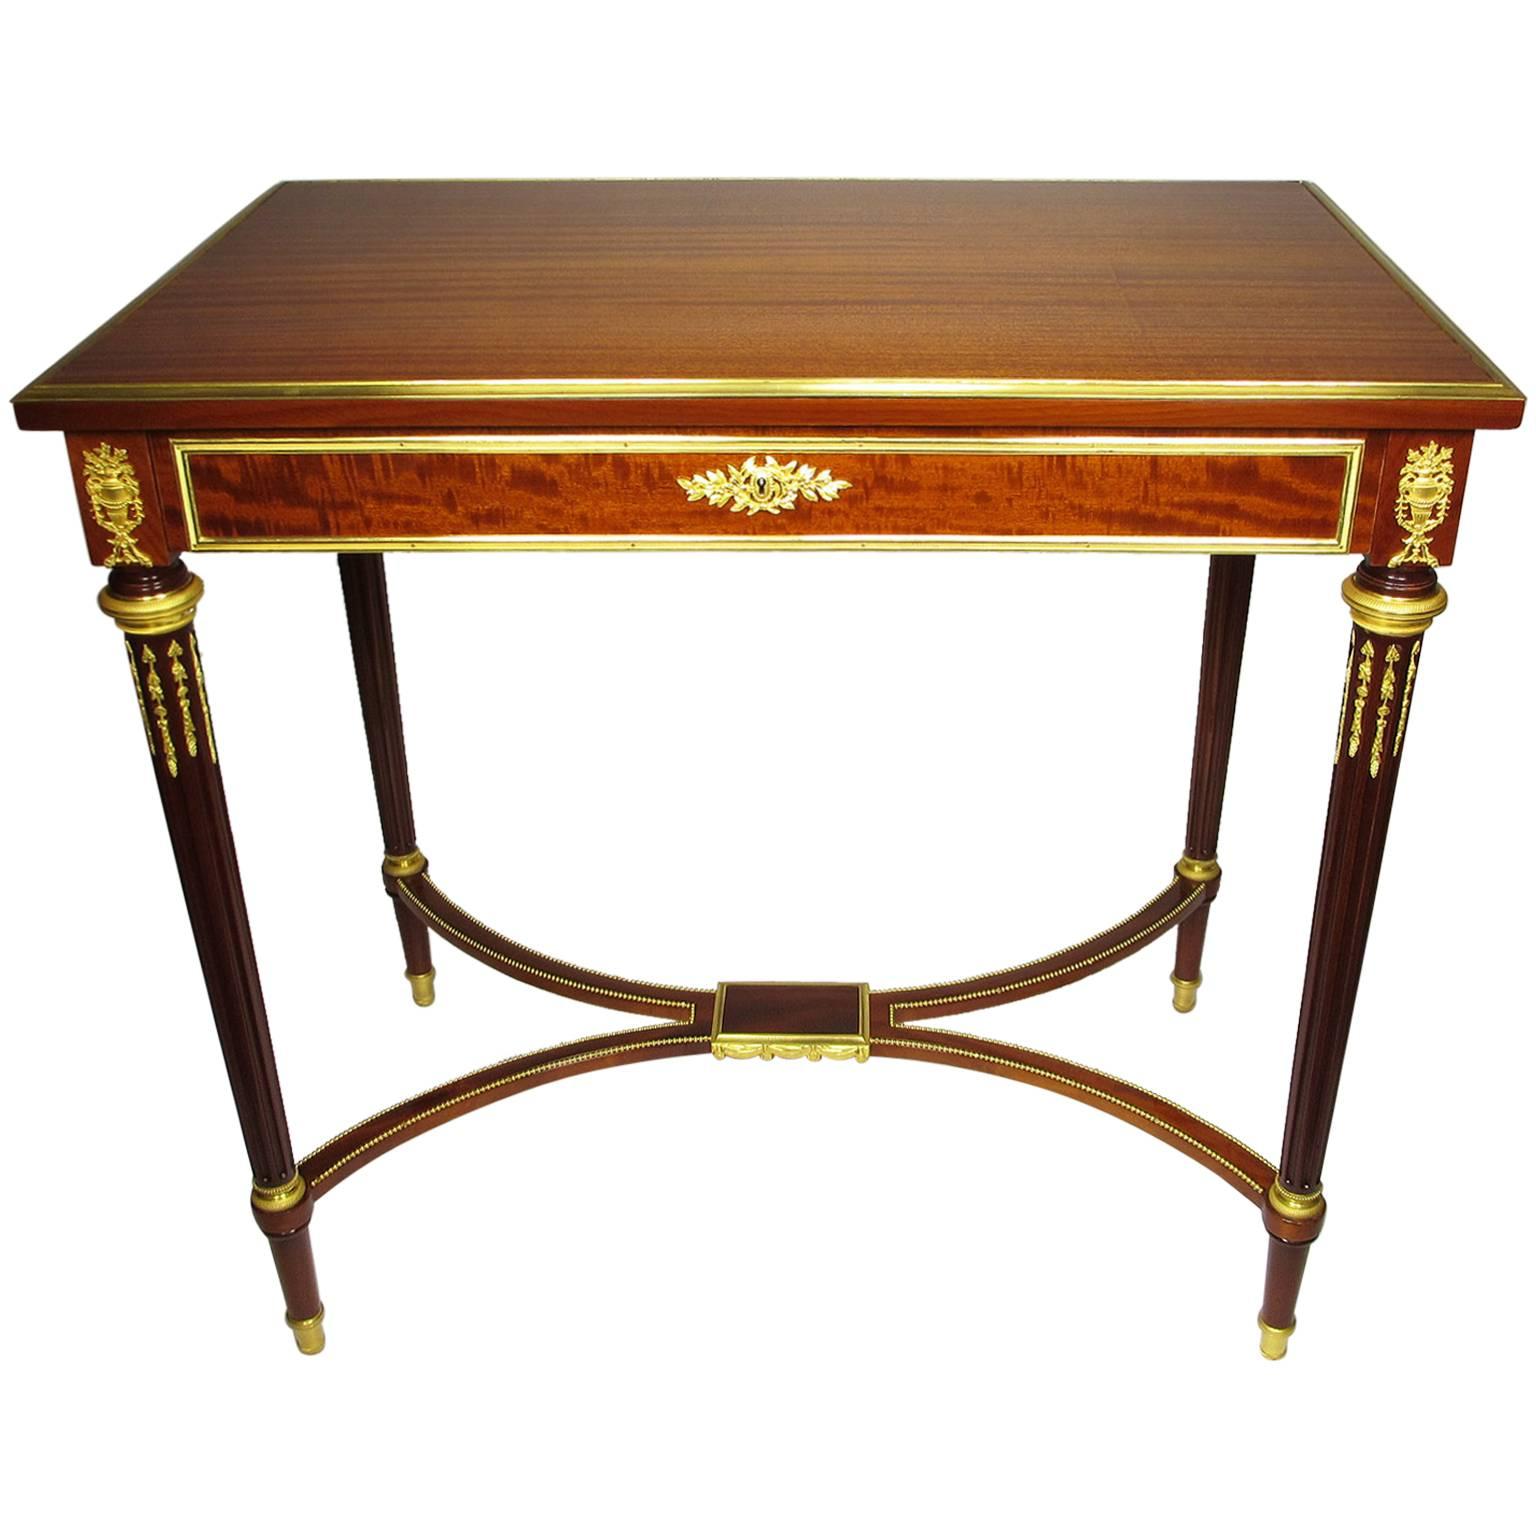 Fine French 19th Century Louis XVI Style Mahogany and Ormolu-Mounted Side Table